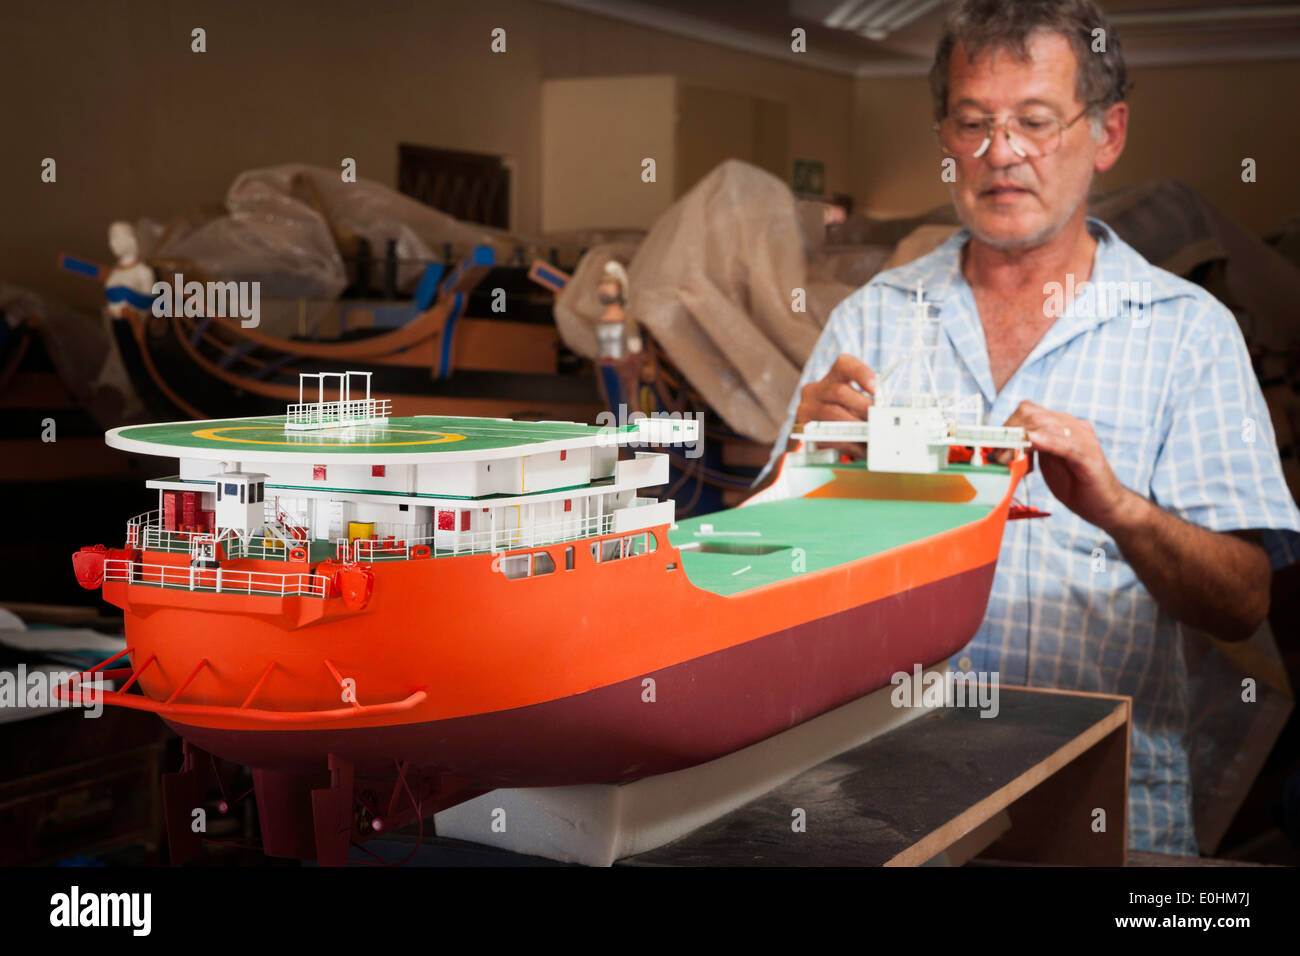 Employee works on a model ship of the DeBeers Diamond Mining ship at the Model Ship Builders, Mosselbay, South Africa Stock Photo